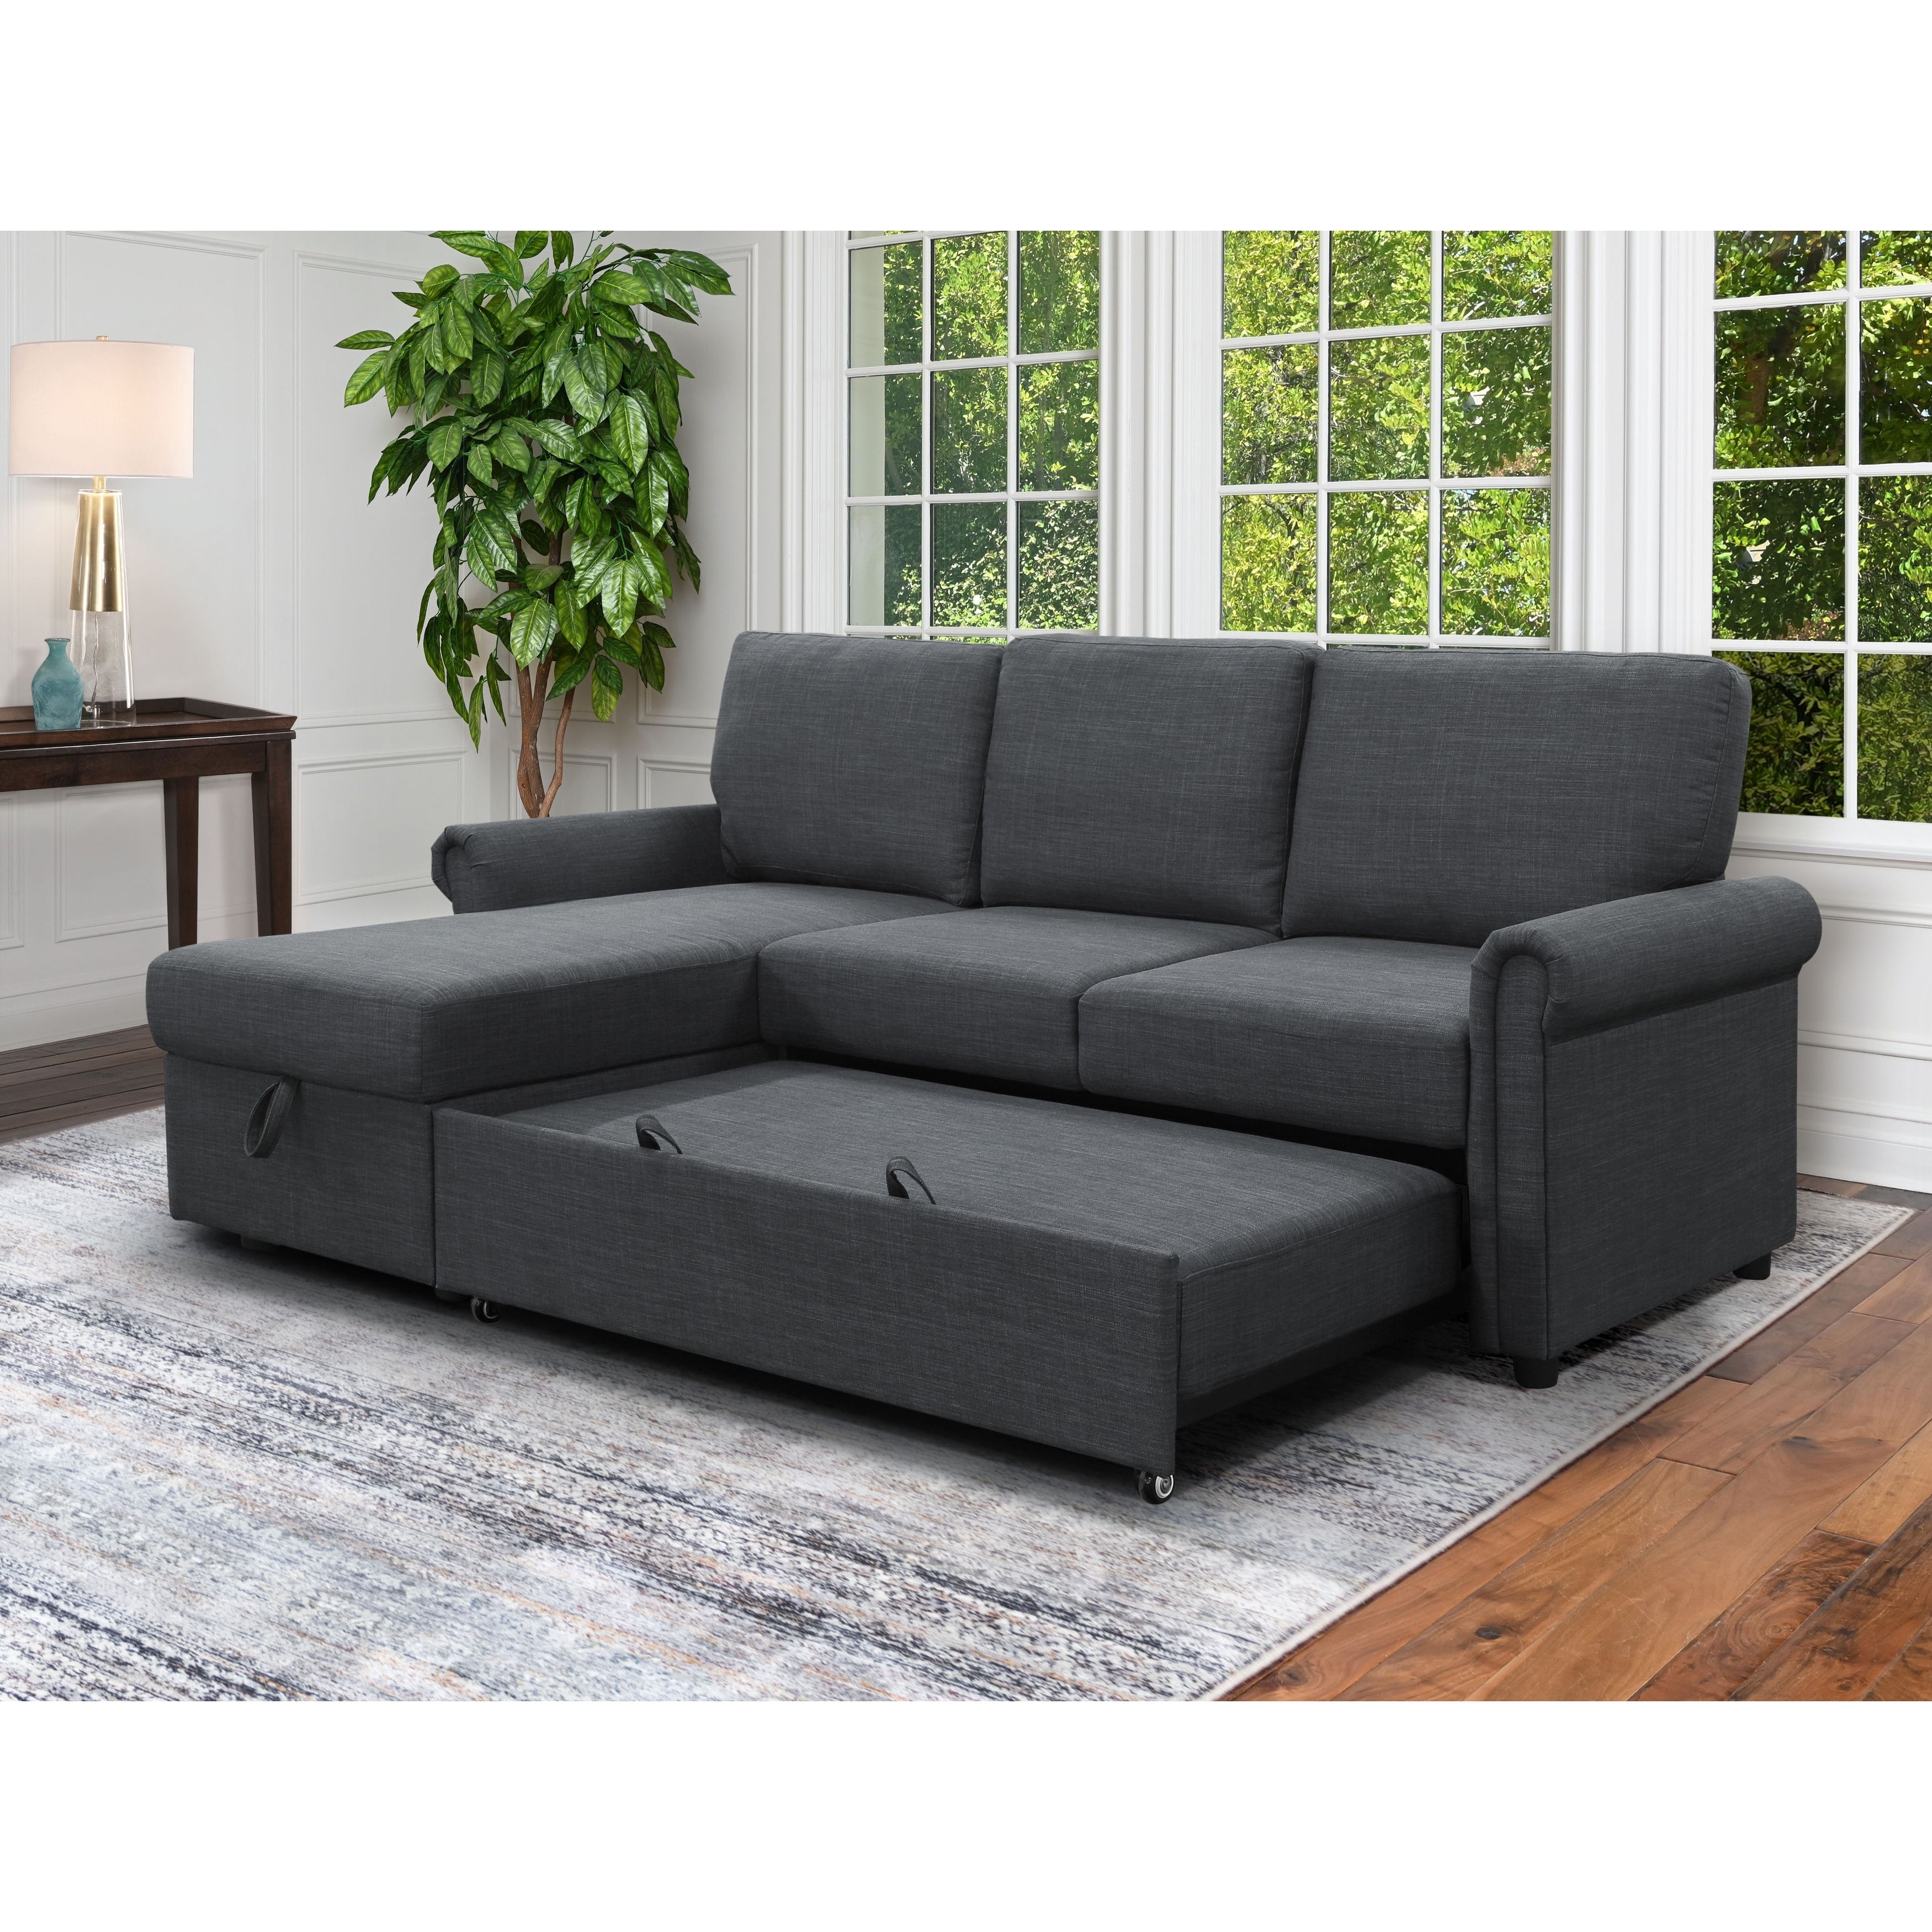 Abbyson Hamilton Reversible Fabric Sleeper Sectional With Storage – –  31997945 Regarding Sectional Sofa With Storage (Gallery 16 of 20)